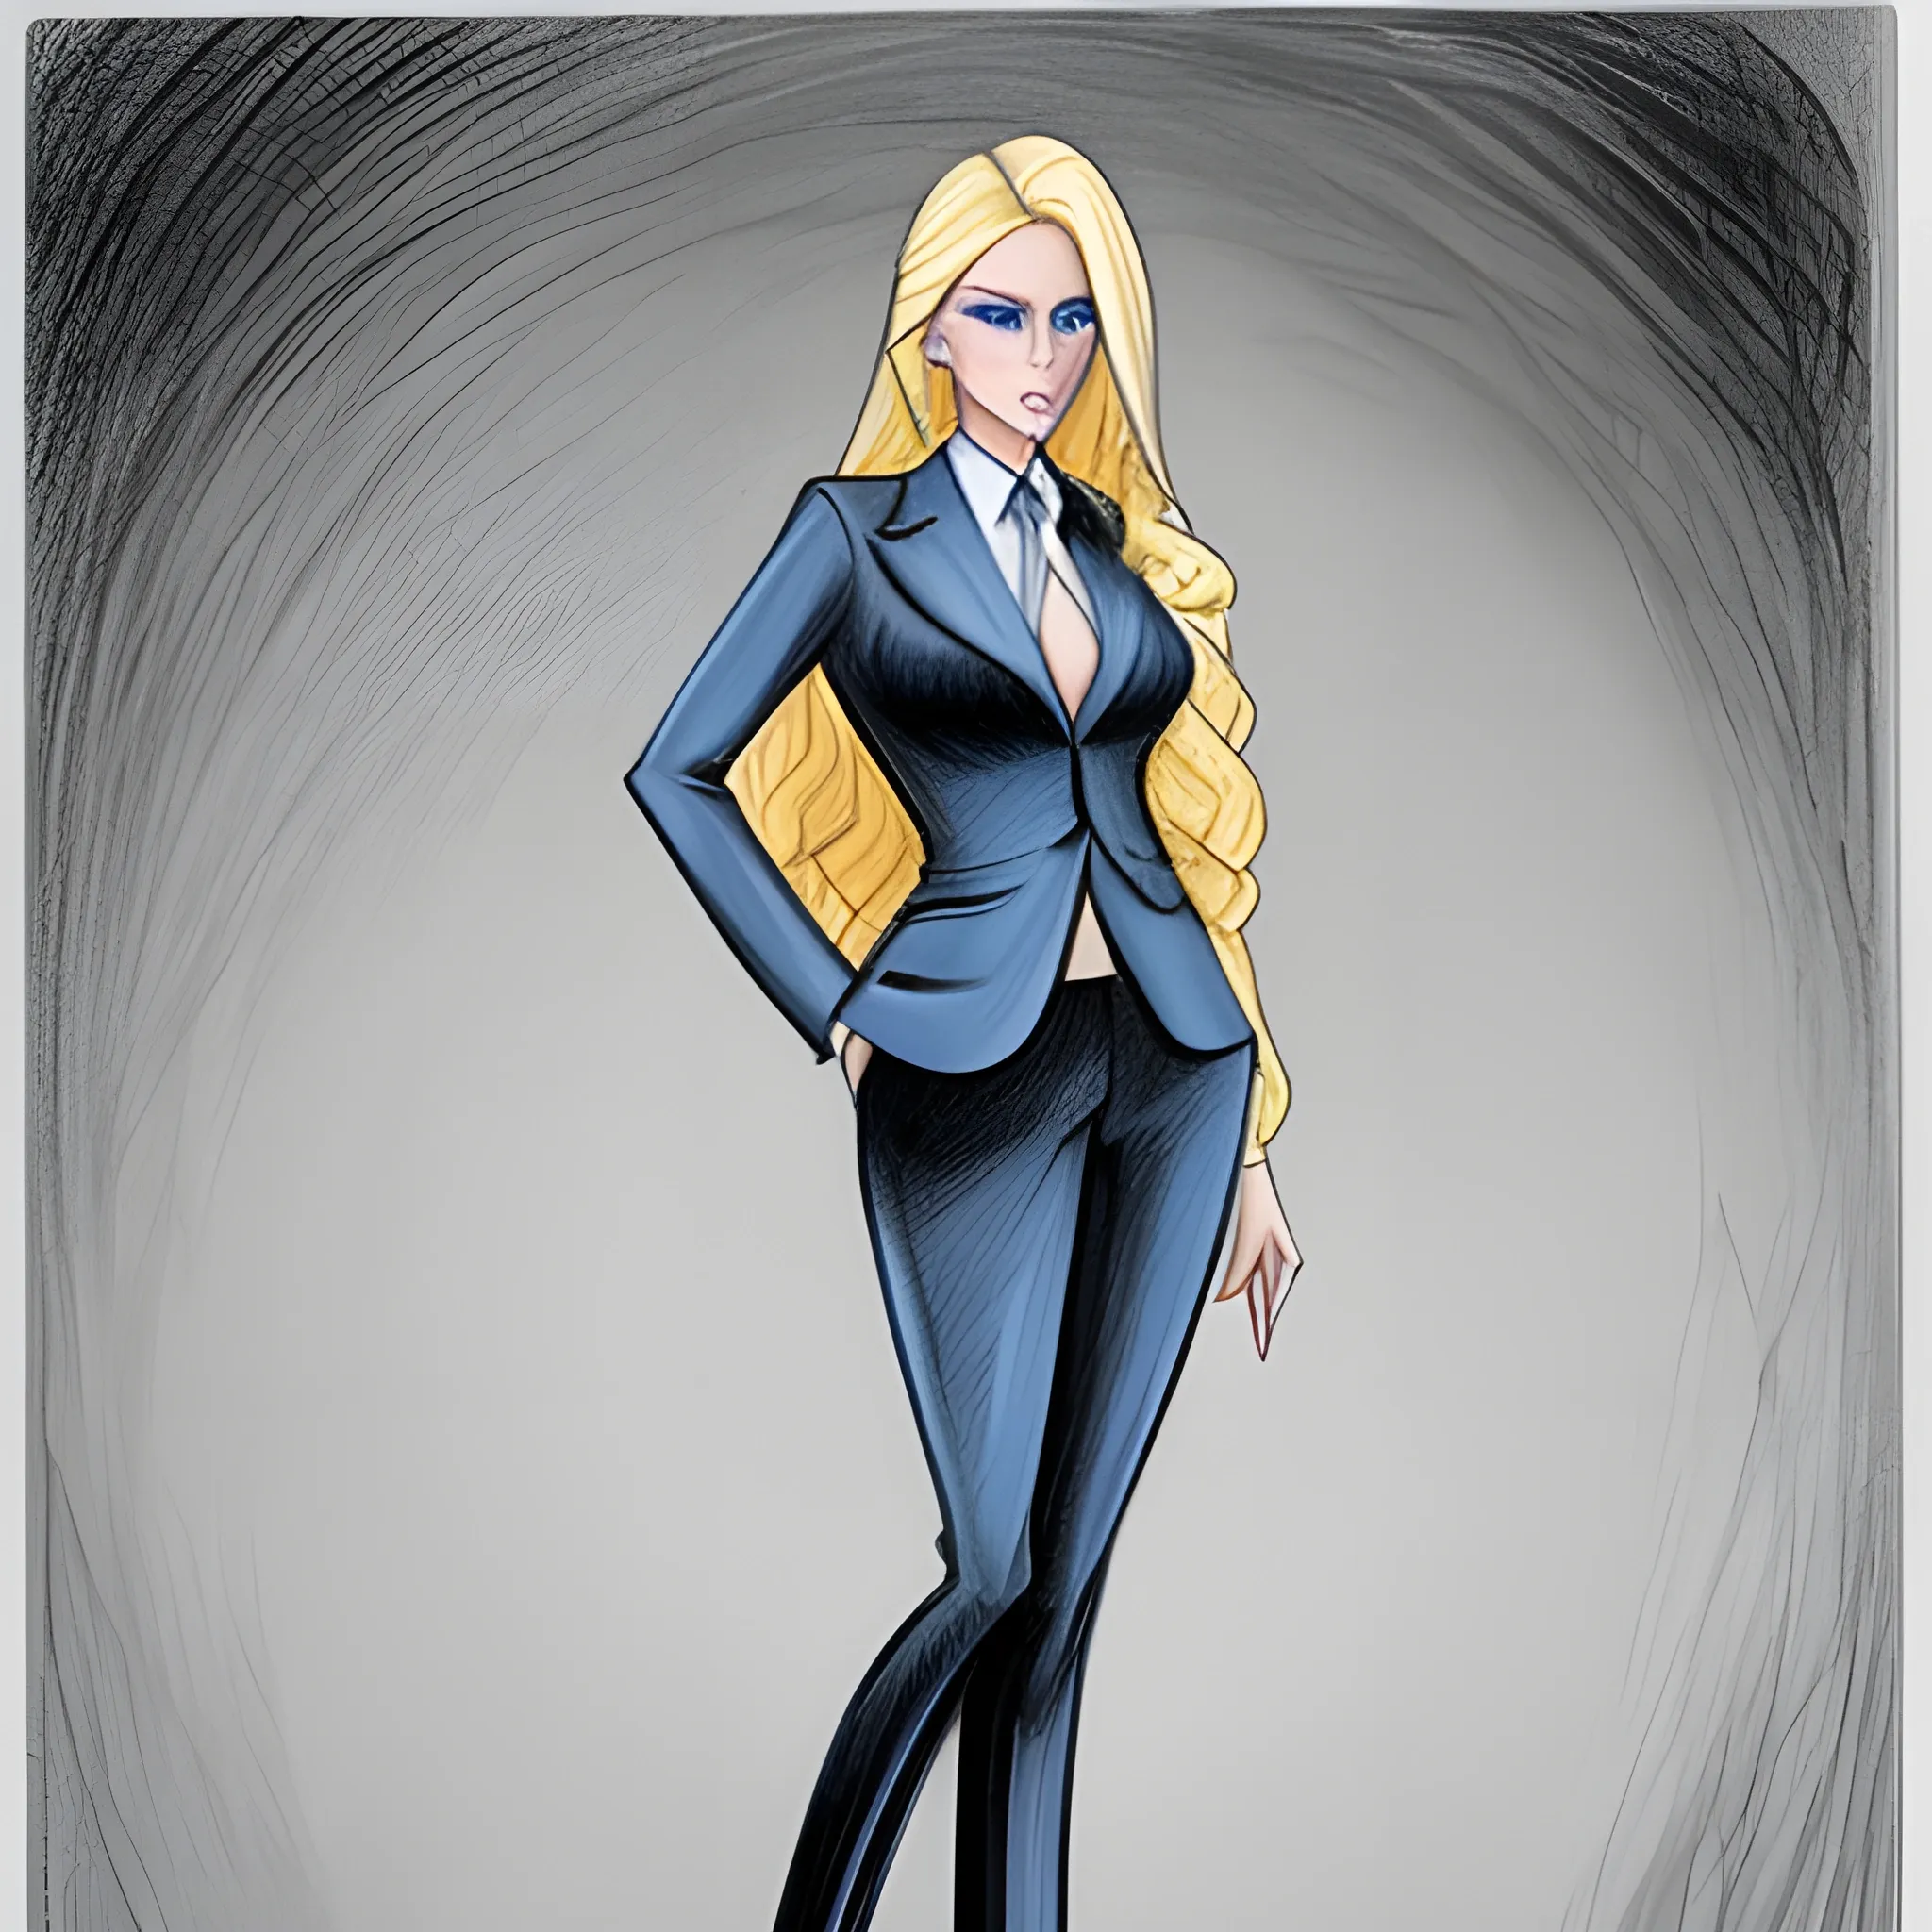 Blue eyes, soft curves, very long and thick blonde hair, dramatic hourglass figure, five-foot five-inches tall, wearing high-heels, business suit, pencil sketch
